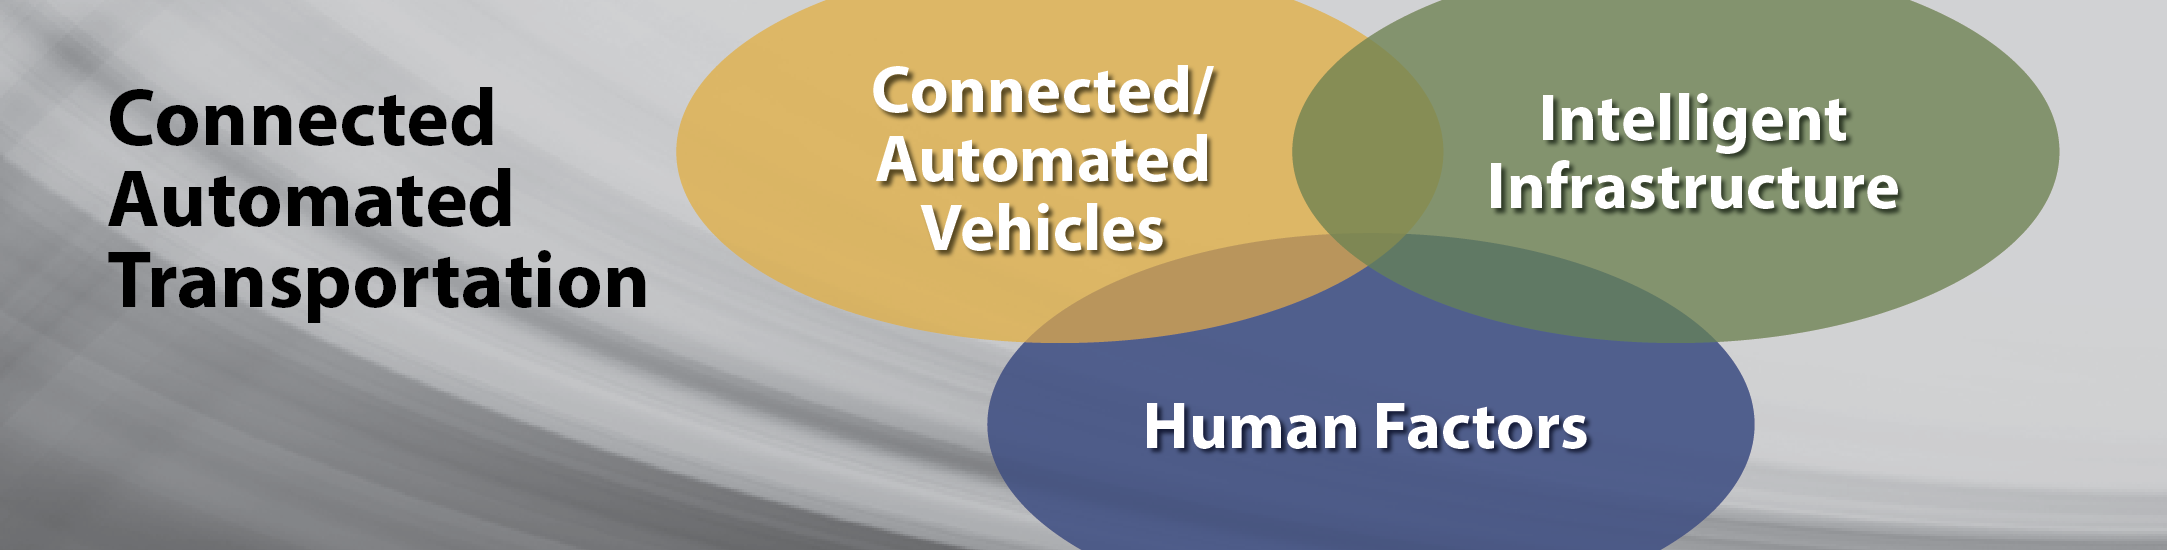 Graphic | Connected Automated Transportation, Connected/Automated Vehicles, Intelligent Infrastructure, Human Factors